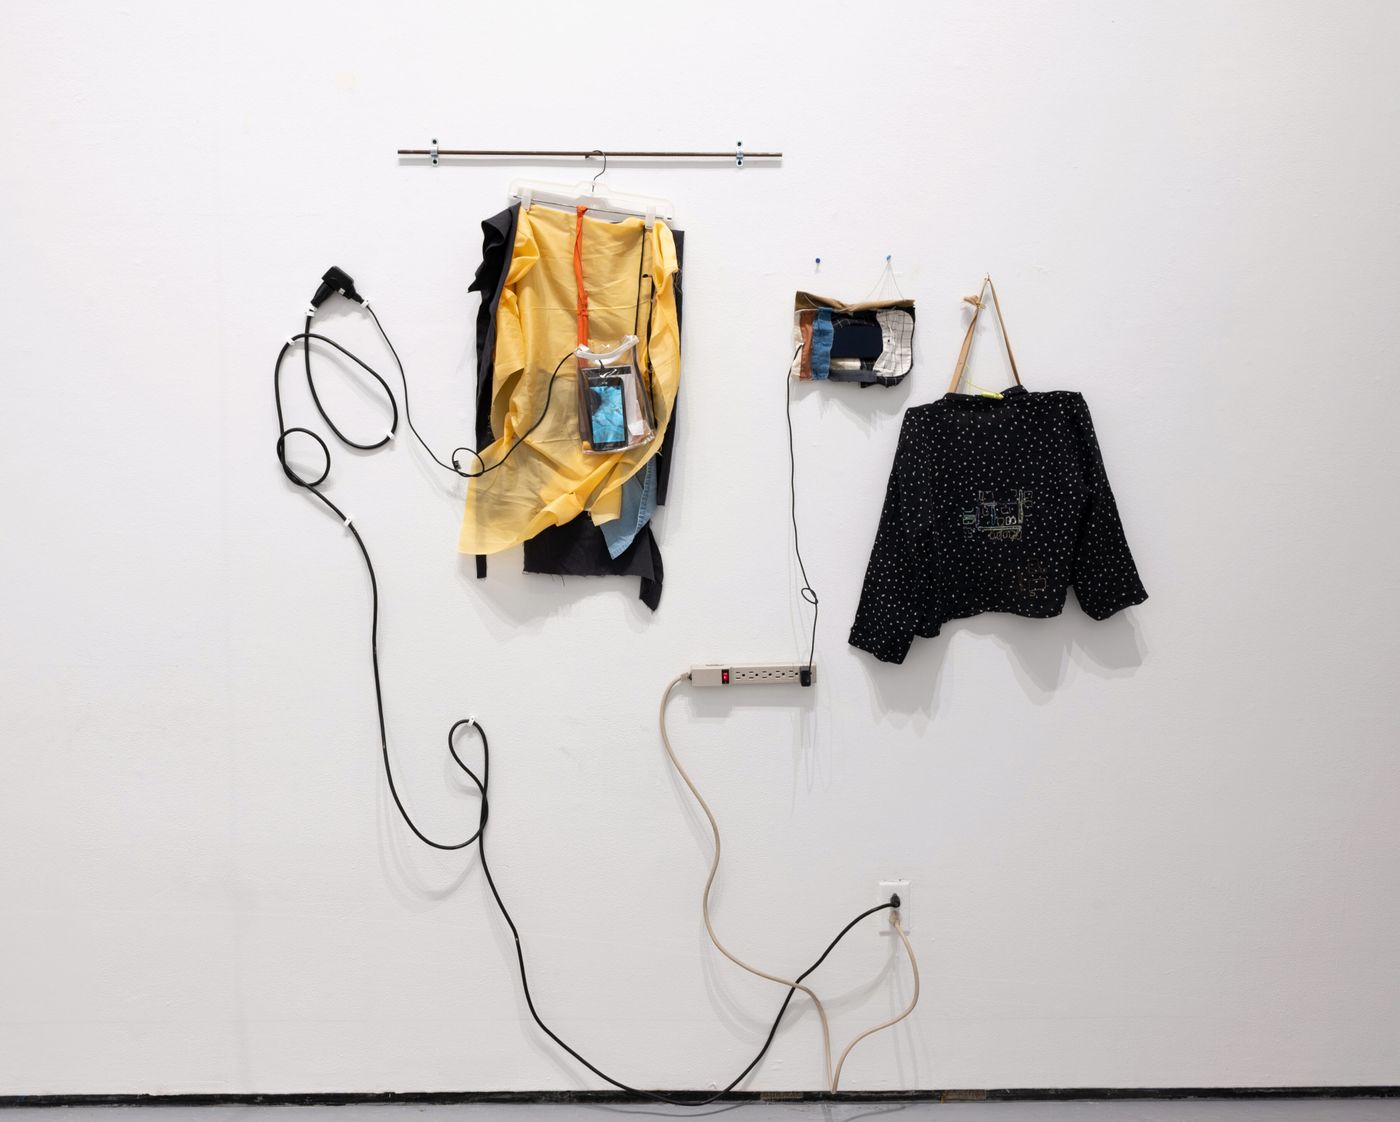 Anne Mailey with collaborators Katherine Yaochen Du and Goda Trakumaite, Conversations Between Cats and Clothes, 2020-2022. Fabric, found objects, cellphones, video, stop motion animations, clothing, thread; 76 x 82 in. Video 4 min, 55 sec. Photo: Allison Minto.